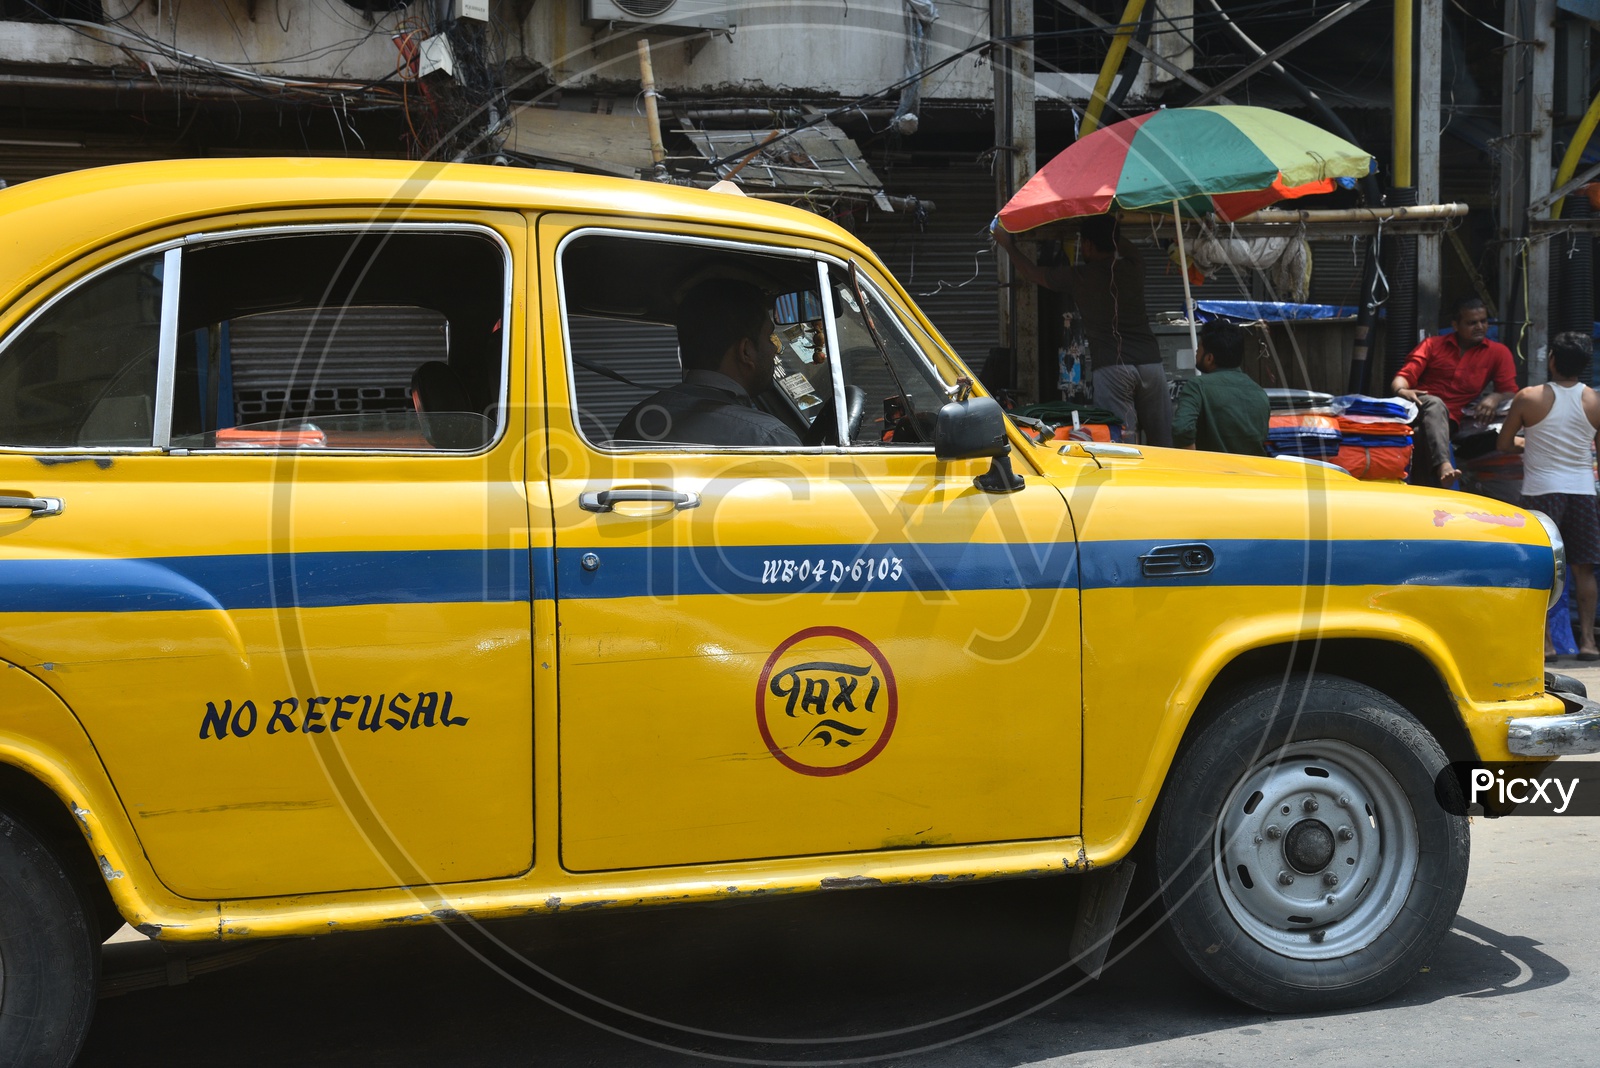 Yellow Color Taxis Or Cabs on The Roads Of Kolkata